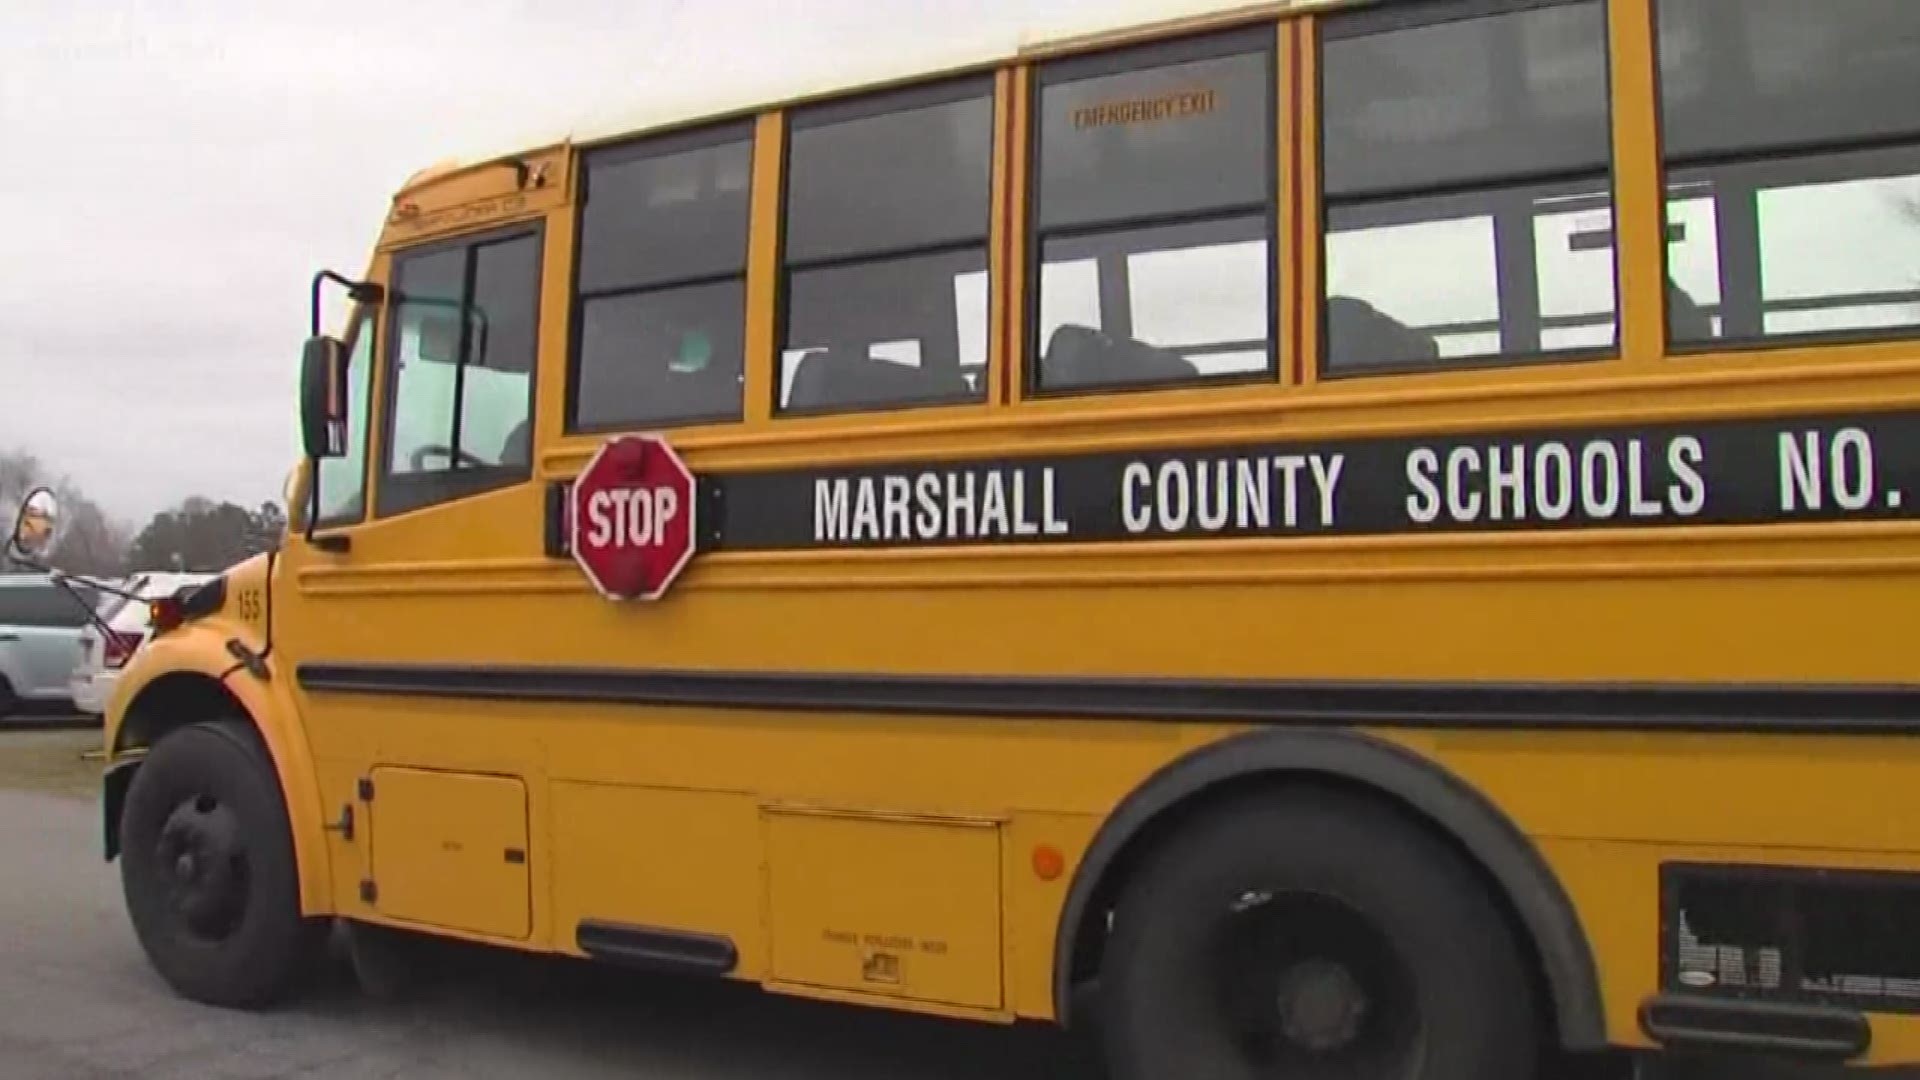 Three school initiatives will take effect: the school safety bill created after the devastating Marshall County shooting, free speech on campuses and rising tobacco rates.